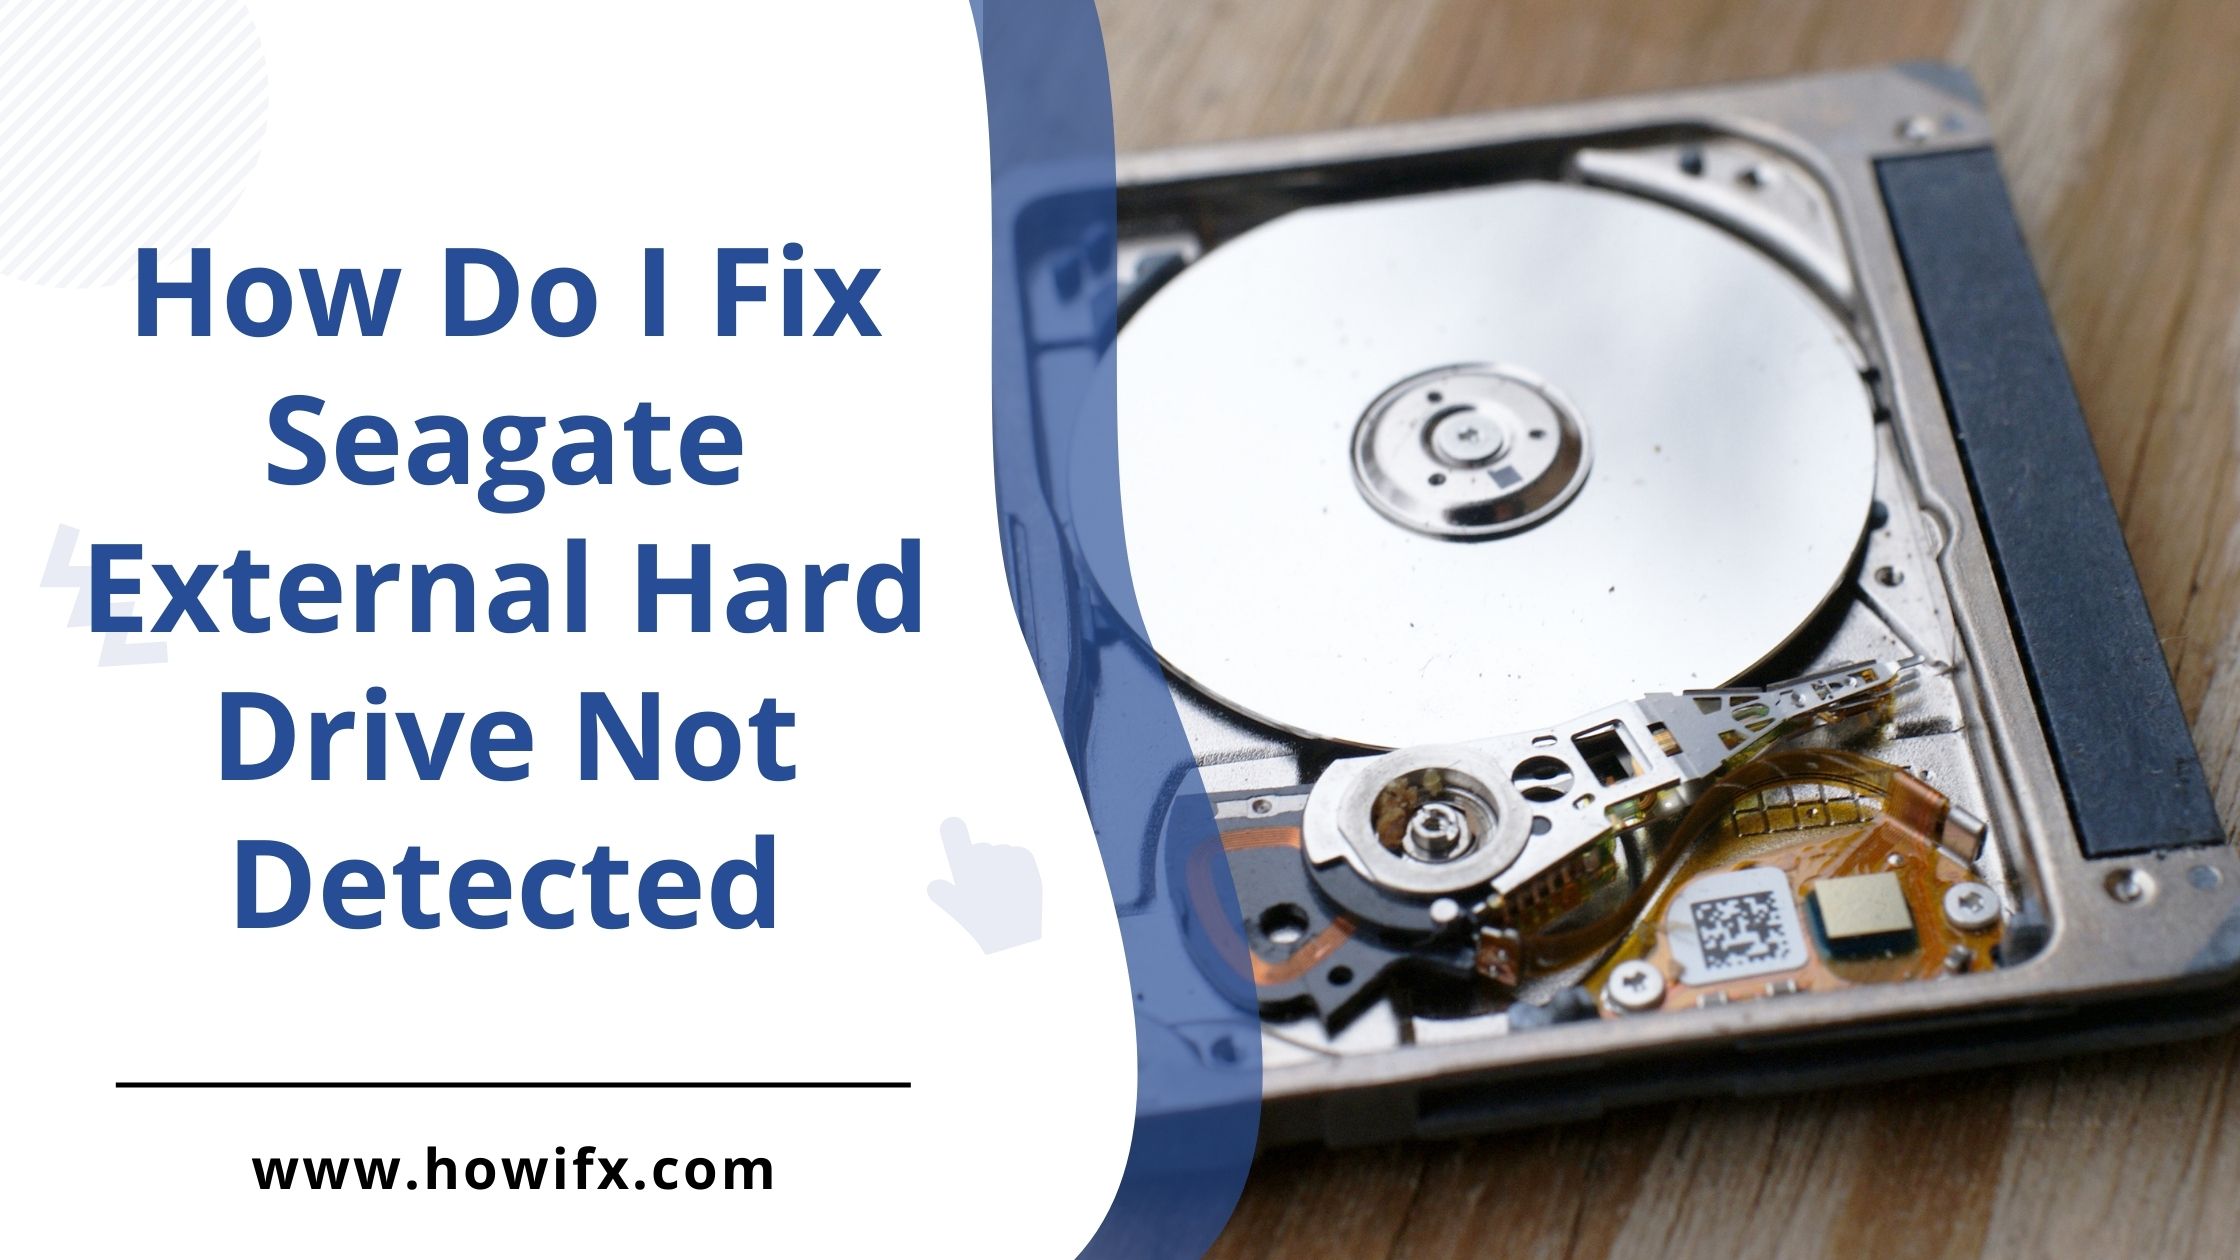 How Do I Fix Seagate External Hard Drive Not Detected